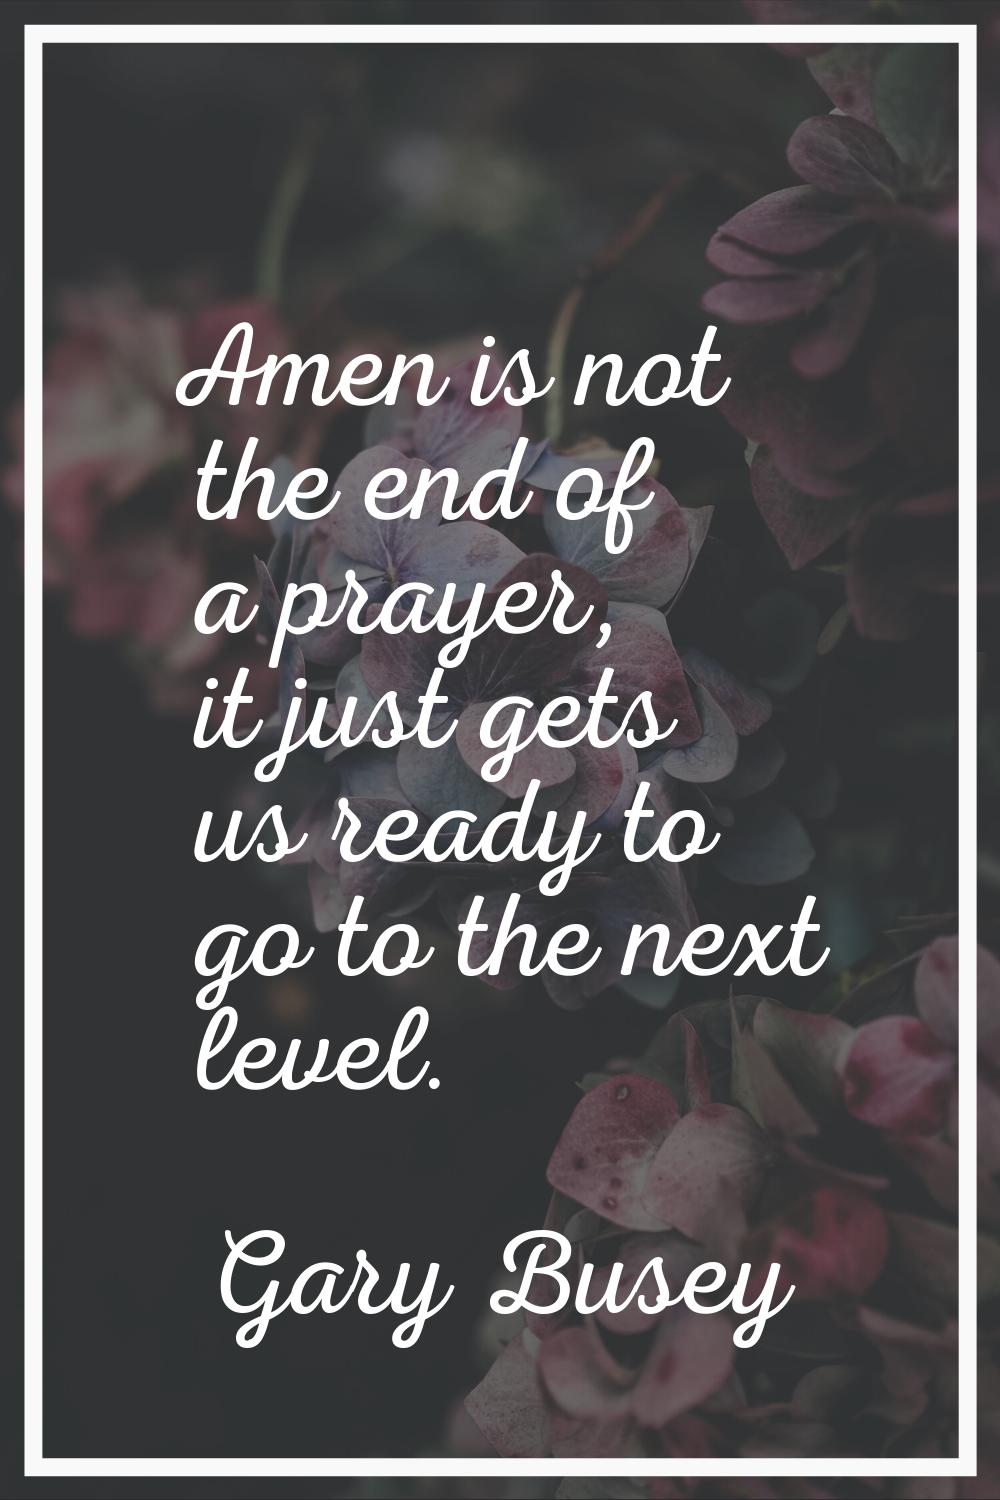 Amen is not the end of a prayer, it just gets us ready to go to the next level.